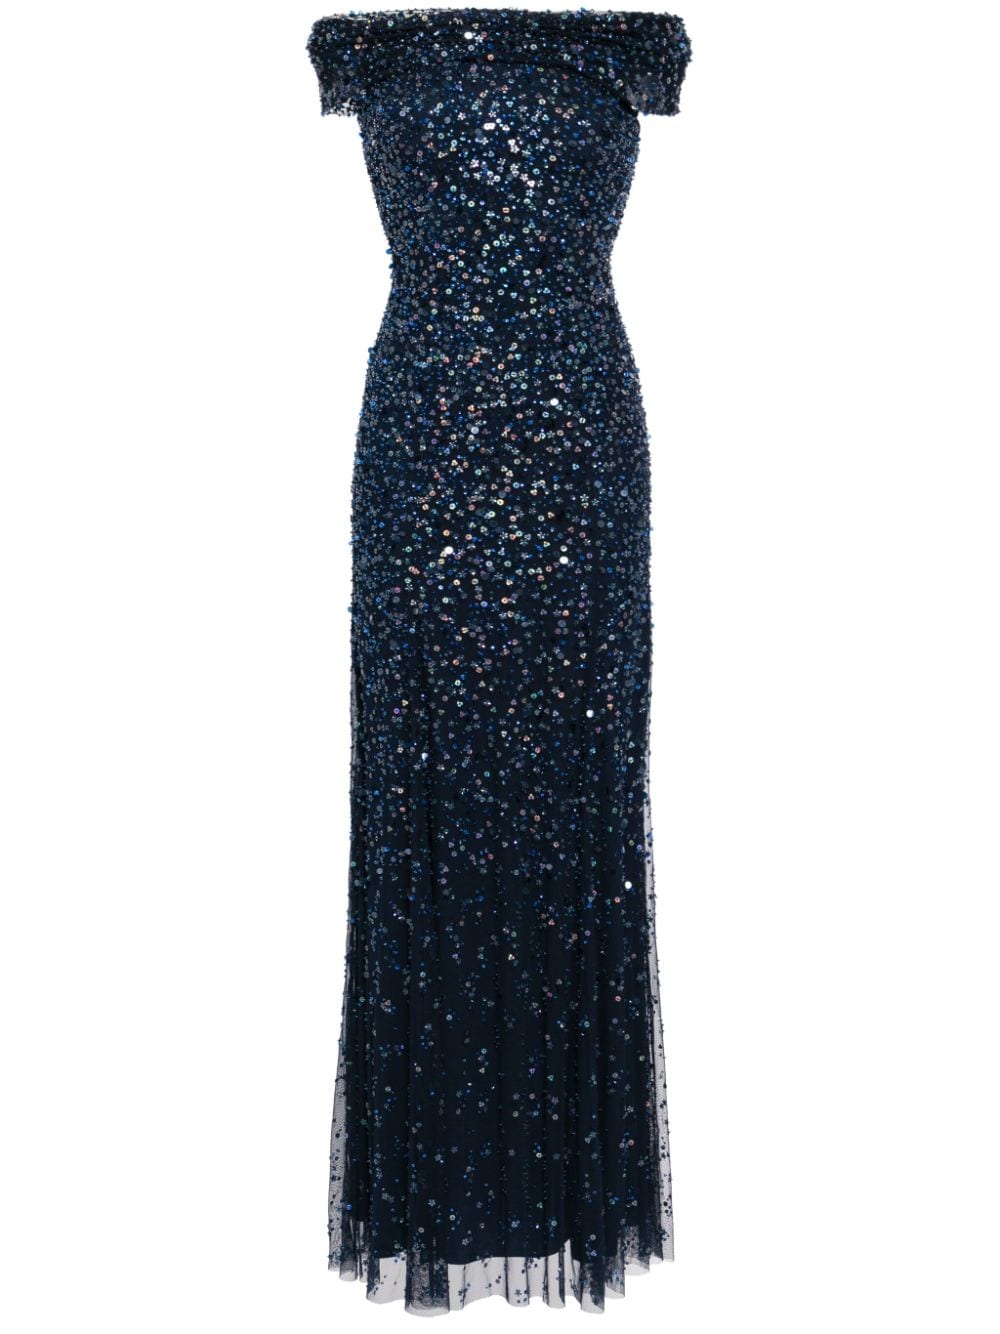 Buttercup sequinned gown dress